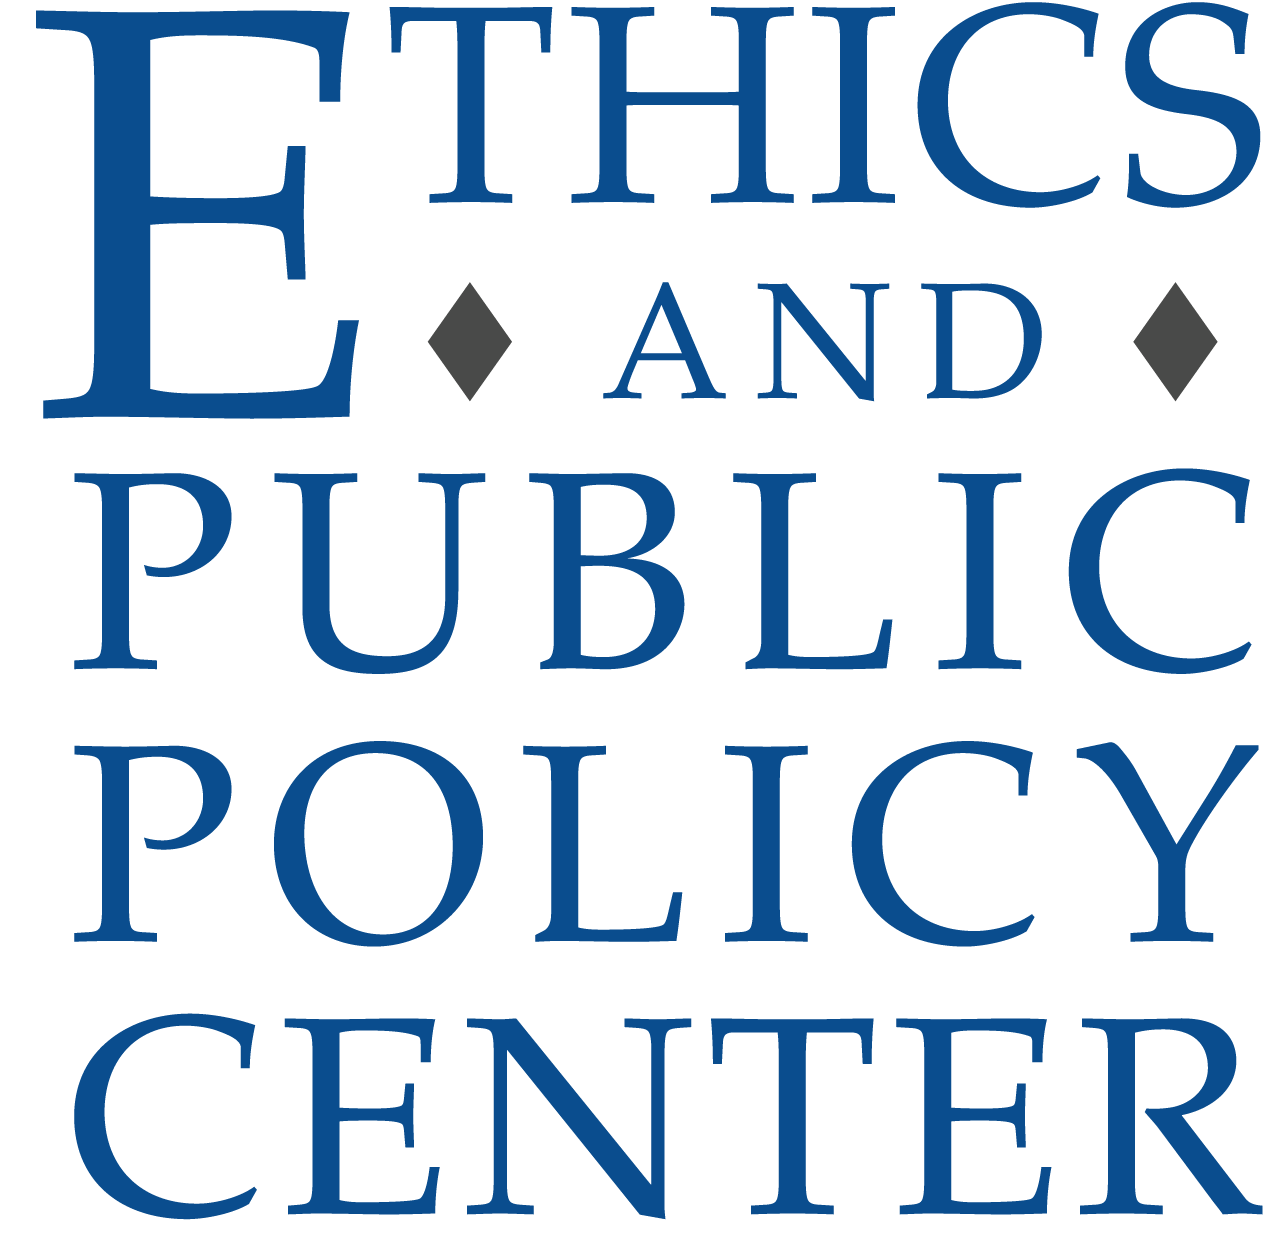 ethics and public policy center  logo